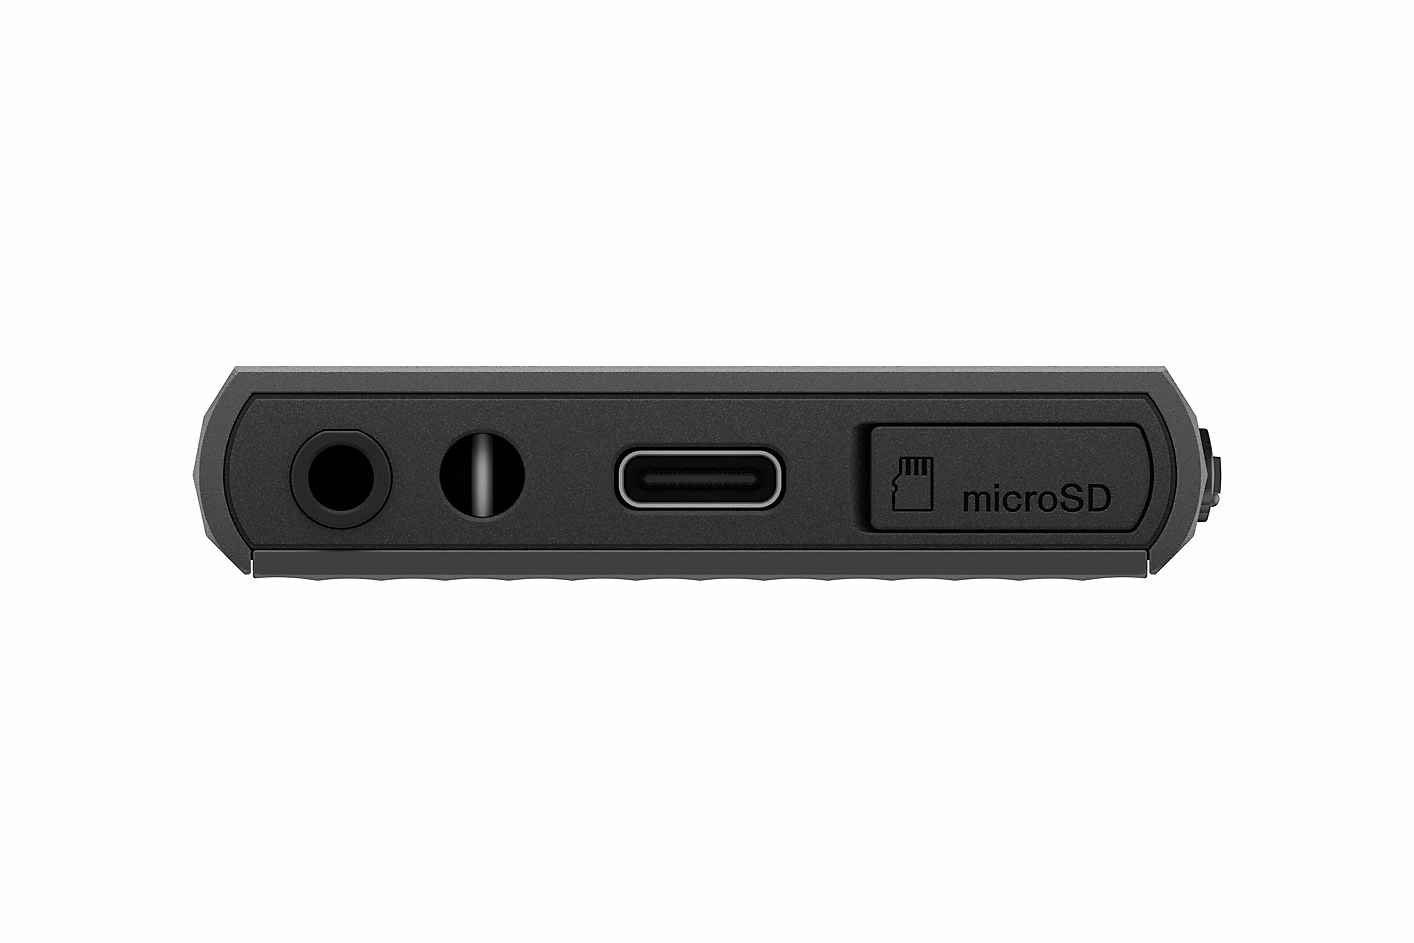 An image of the NW-A306 USB Type-C port.